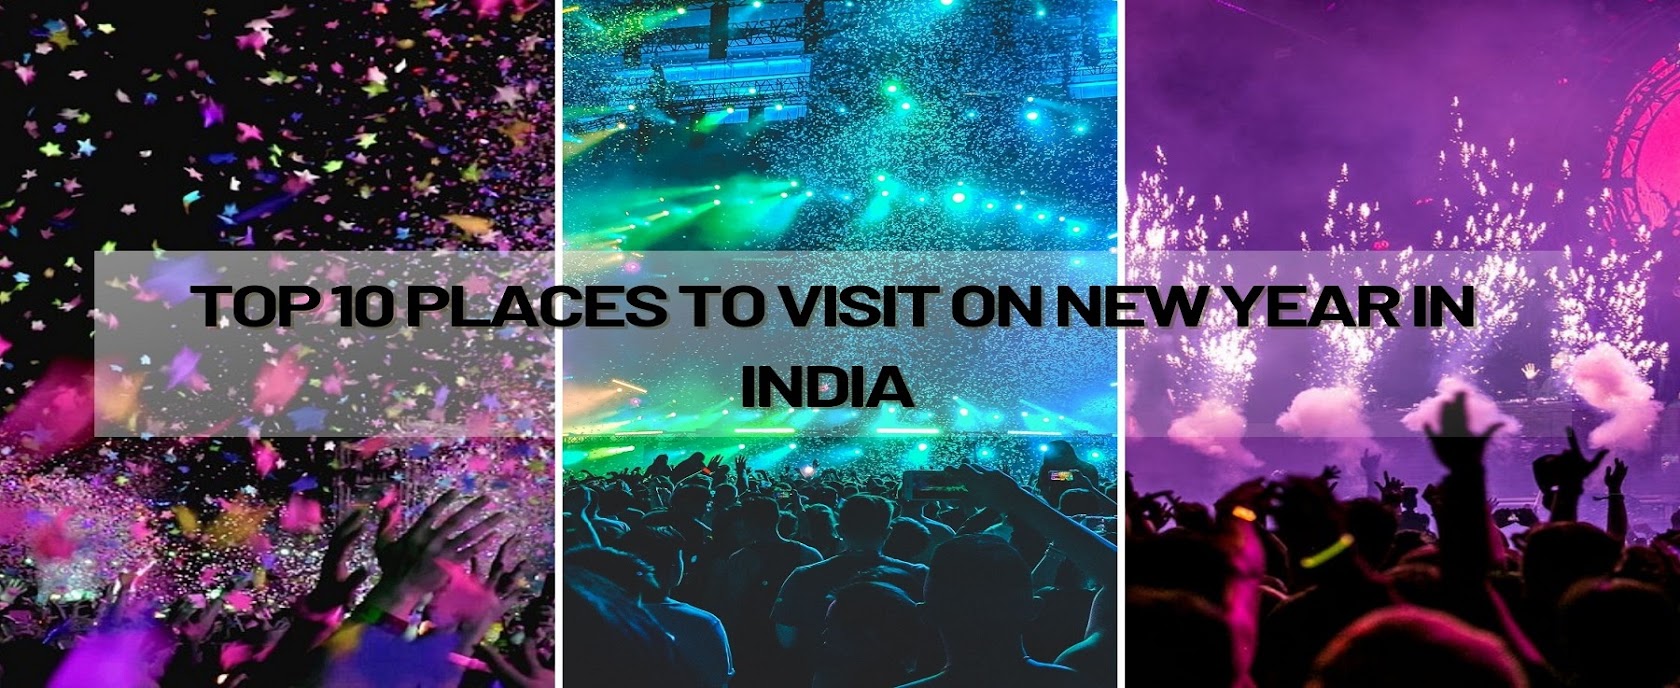 Top 10 Places To Visit On New Year In India 2023